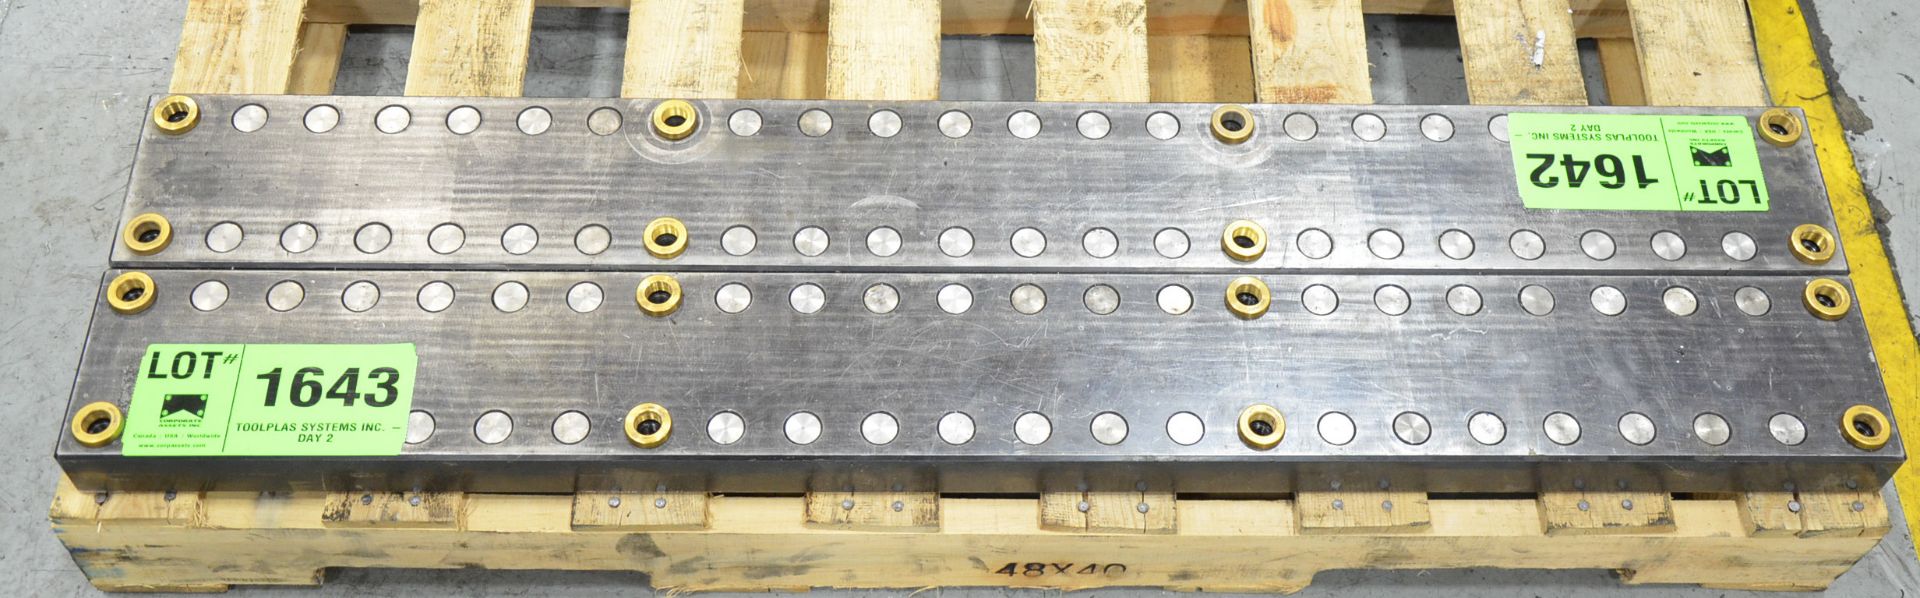 5.75 "W x 47.25 "L PLATE WITH FCS SYSTEM CLAMPING